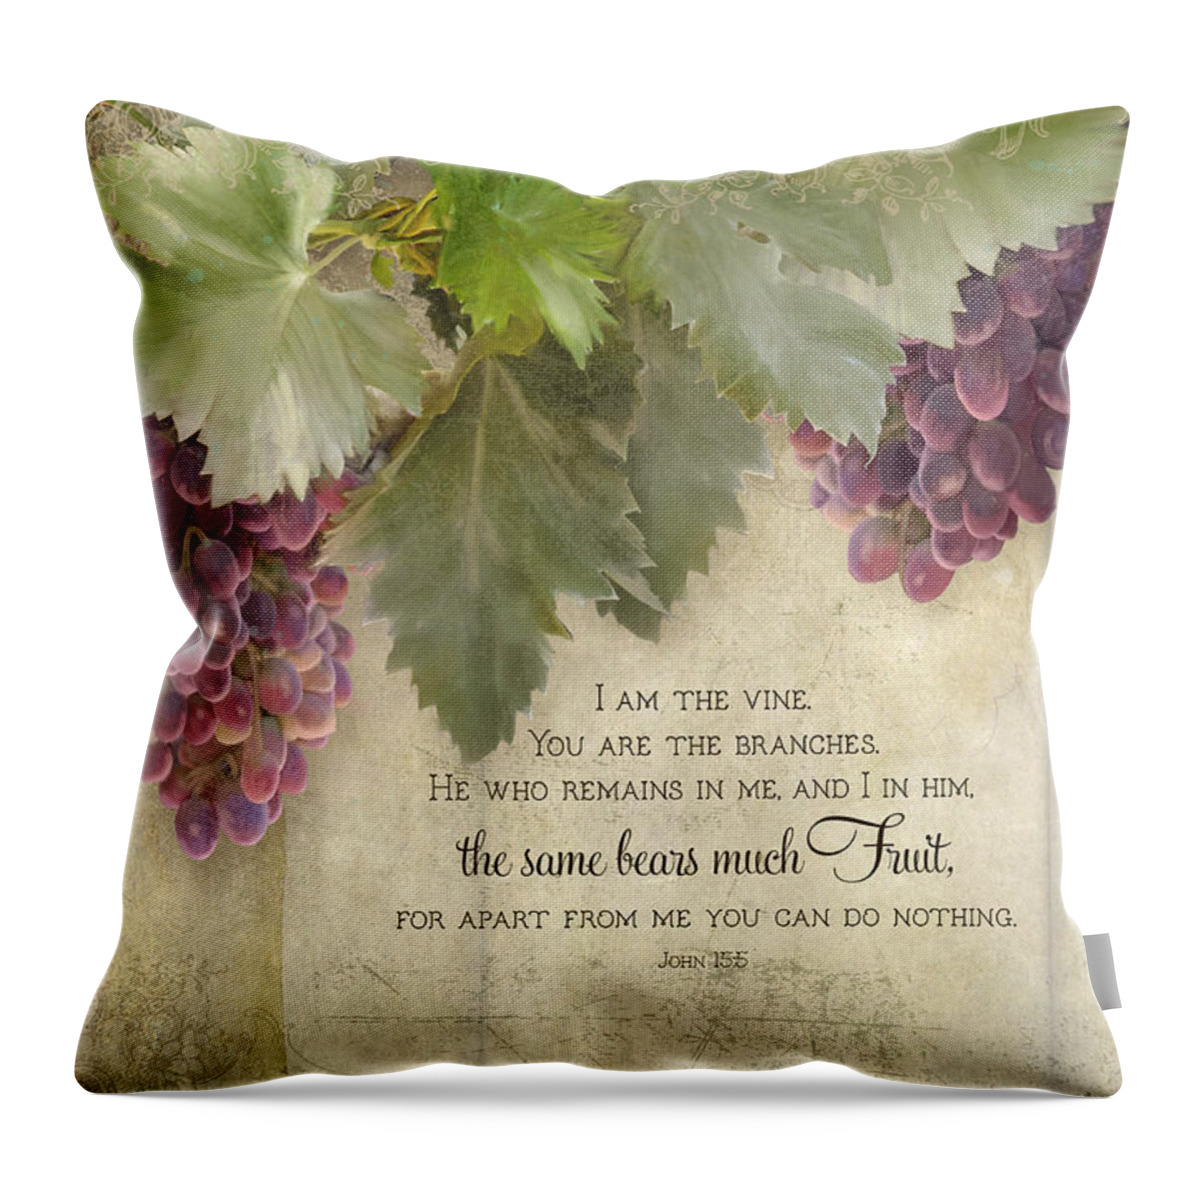 Tuscan Throw Pillow featuring the painting Tuscan Vineyard - Rustic Wood Fence Scripture by Audrey Jeanne Roberts